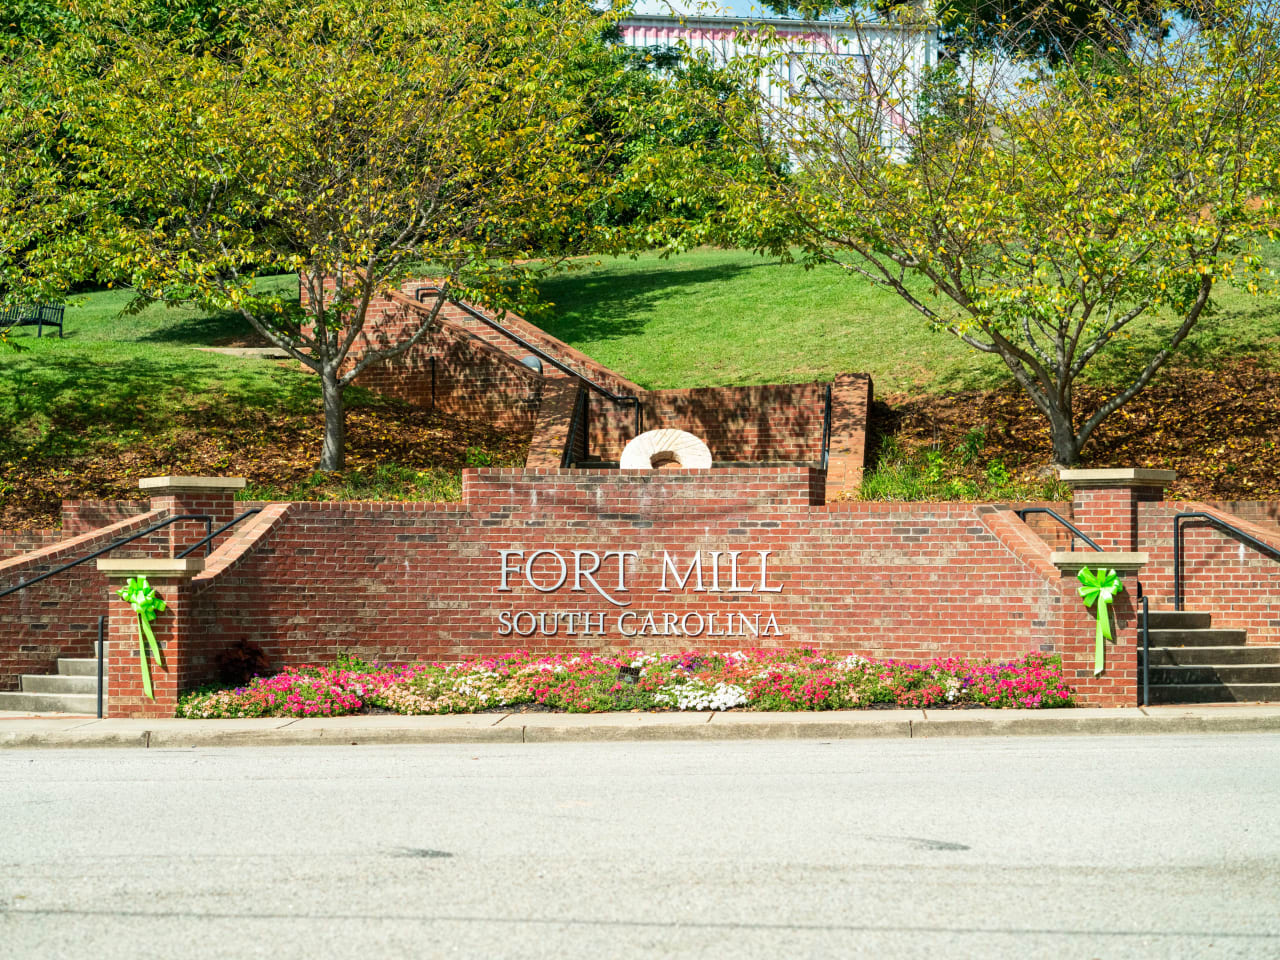 FORT MILL